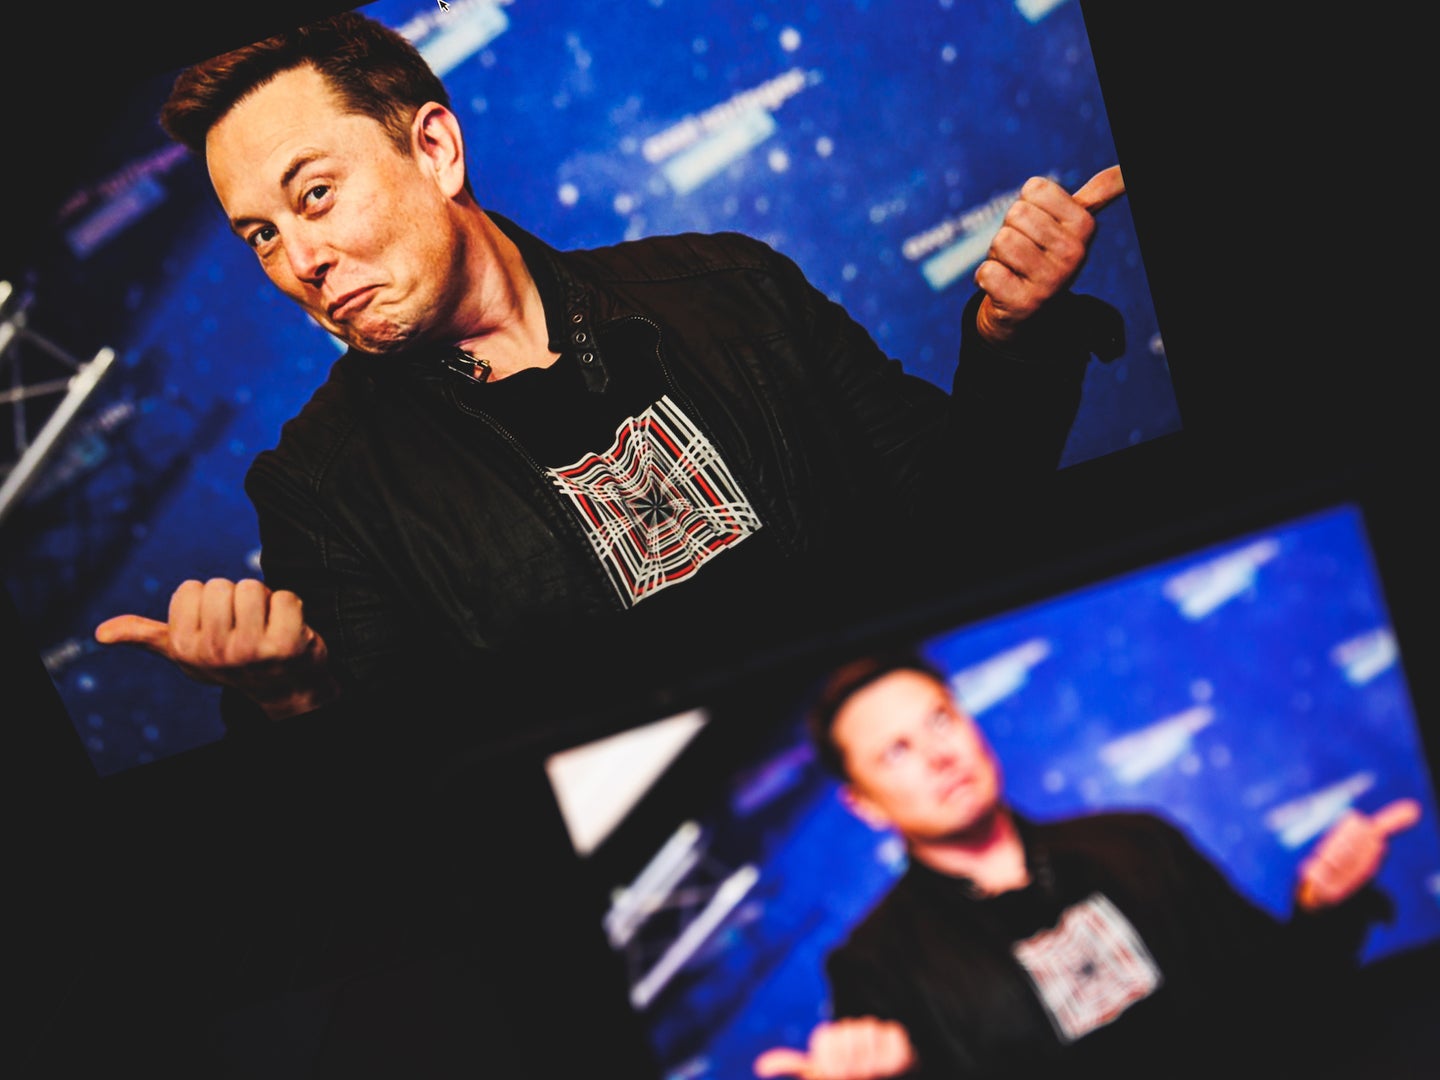 Two photos of Elon Musk on smartphone screens